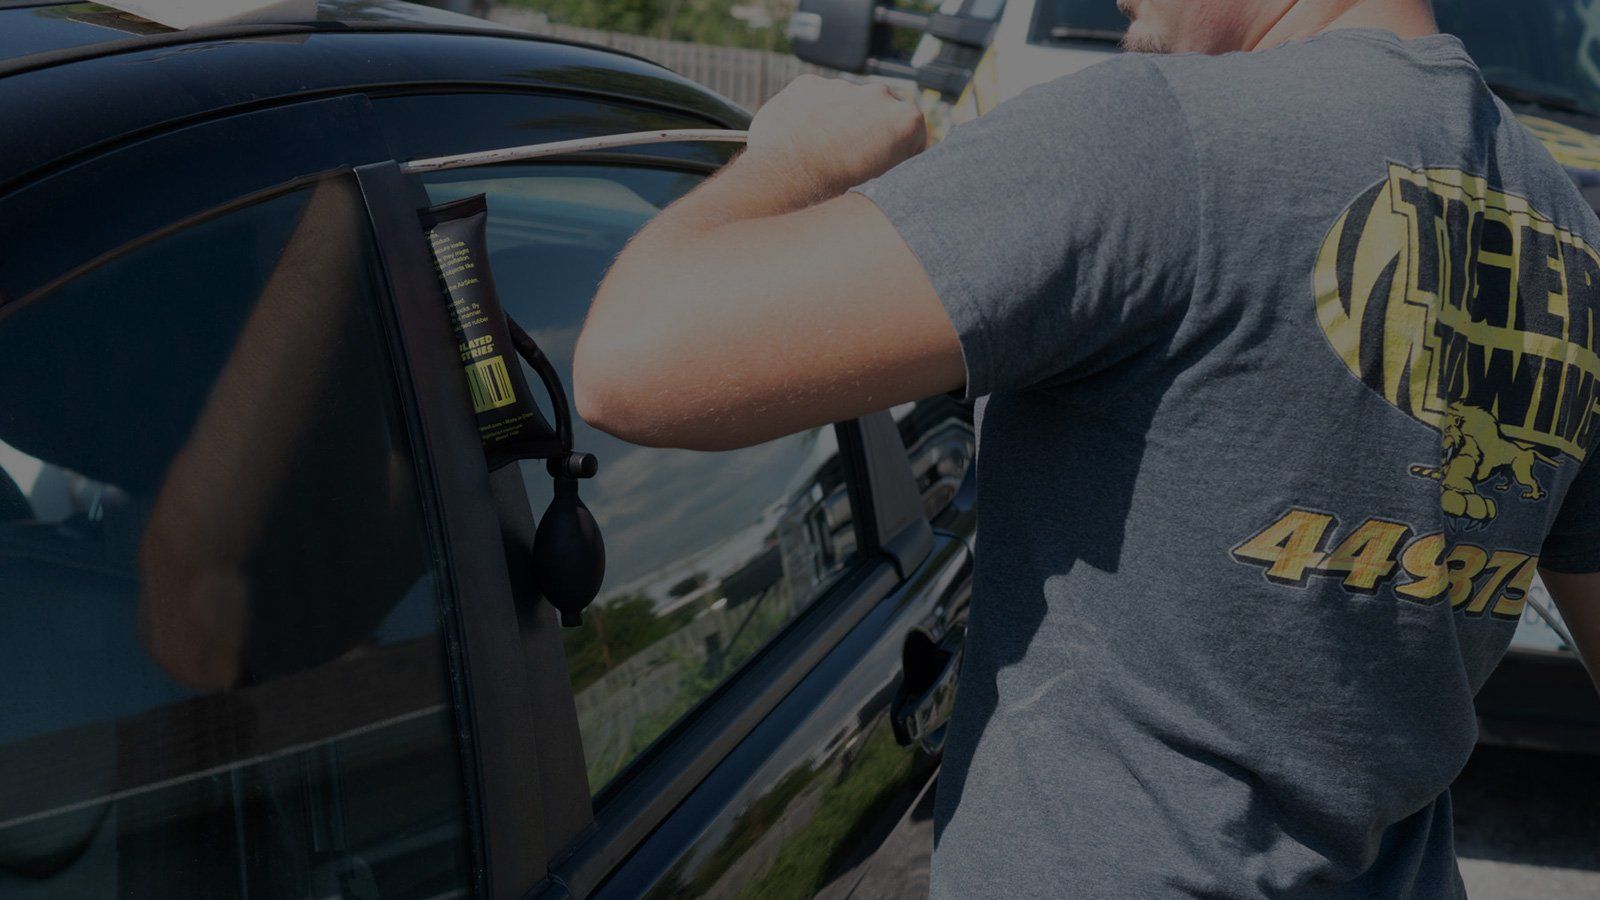 Get locked out of your vehicle? Tiger Towing is available 24 hours a day, 7 days a week to help unlock your car.